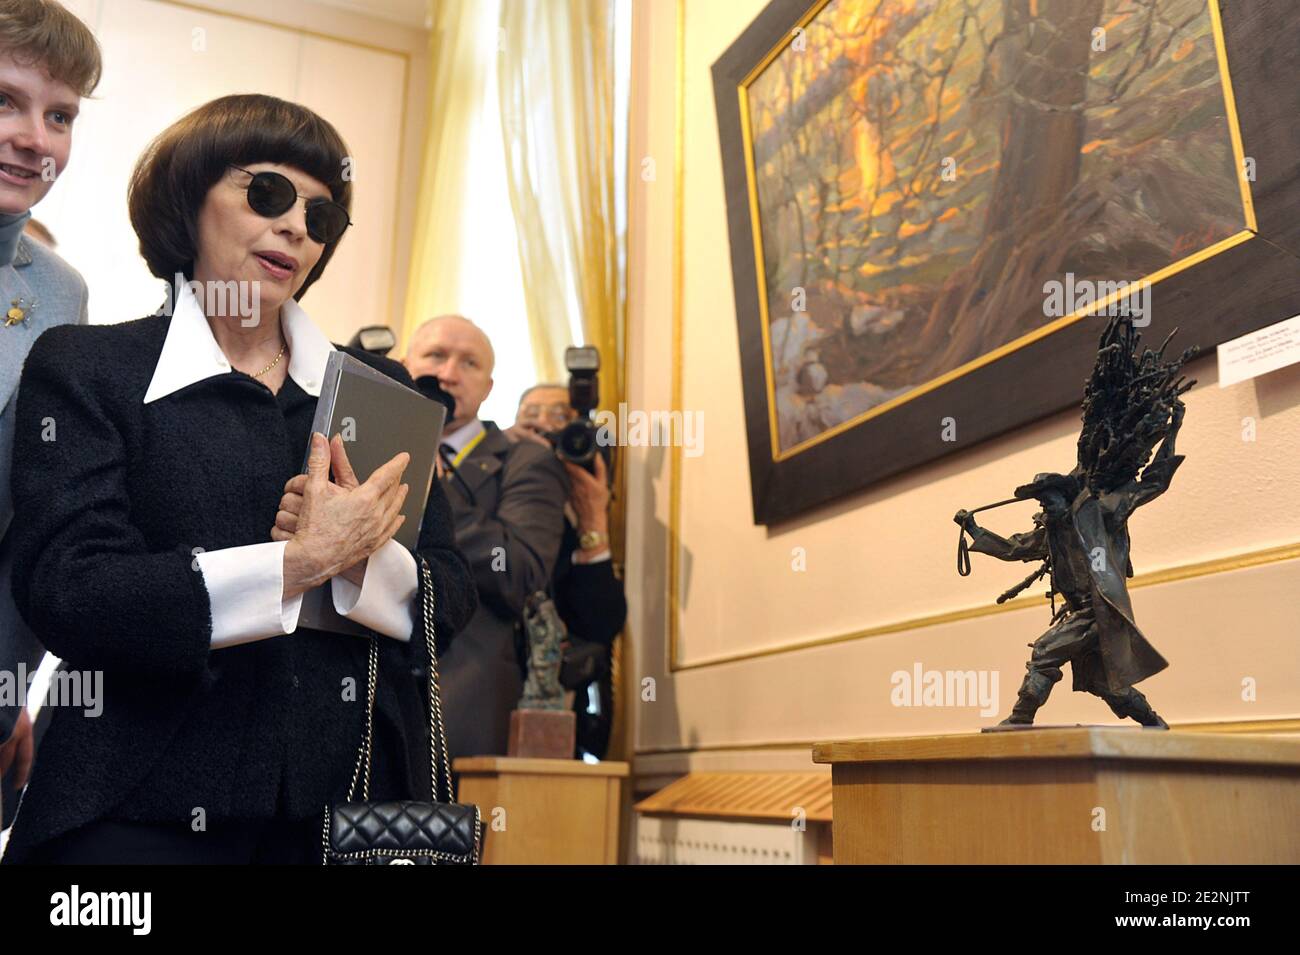 French singer Mireille Mathieu visits the Exhibition 'Une Fenetre Sur La Russie' at the Russian Culture and Science Center in Paris, France on March 2, 2010. Photo by Giancarlo Gorassini/ABACAPRESS.COM Stock Photo